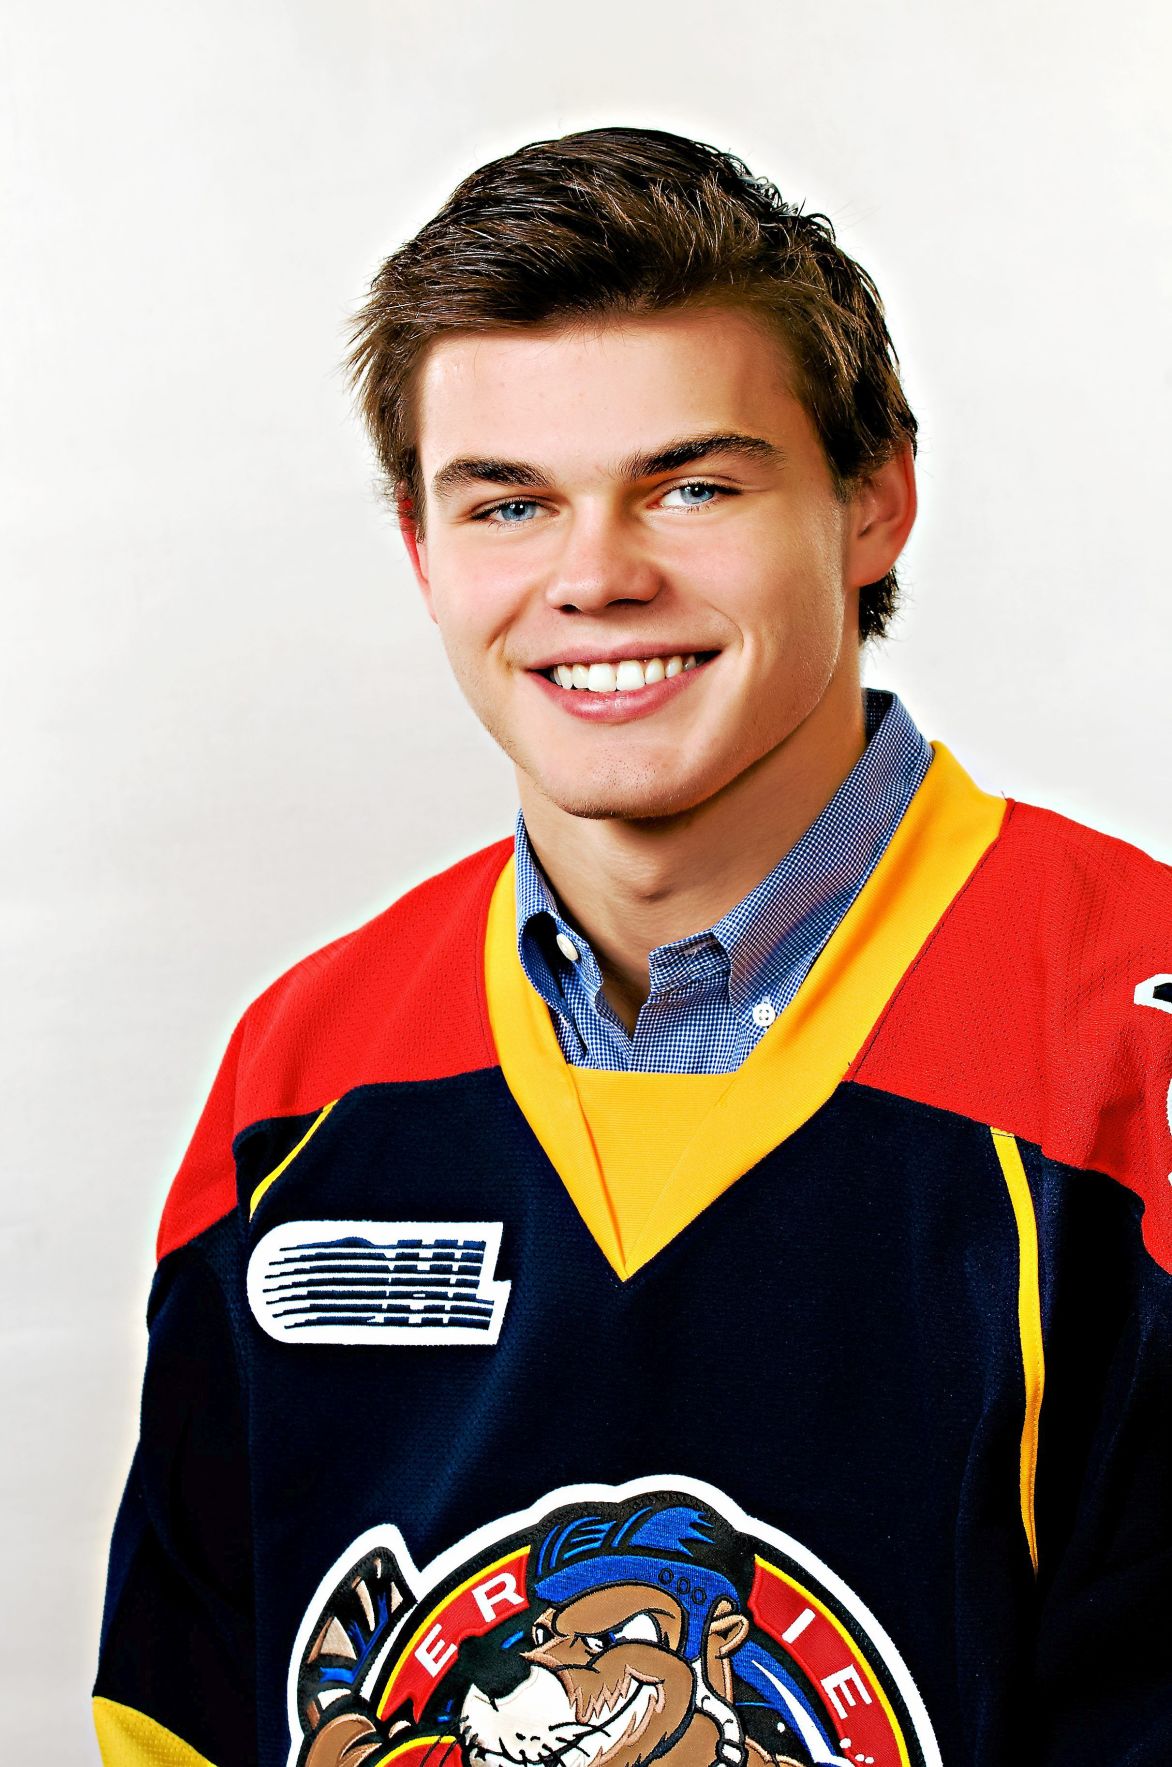 Alex DeBrincat selected 39th overall in the 2016 NHL Draft